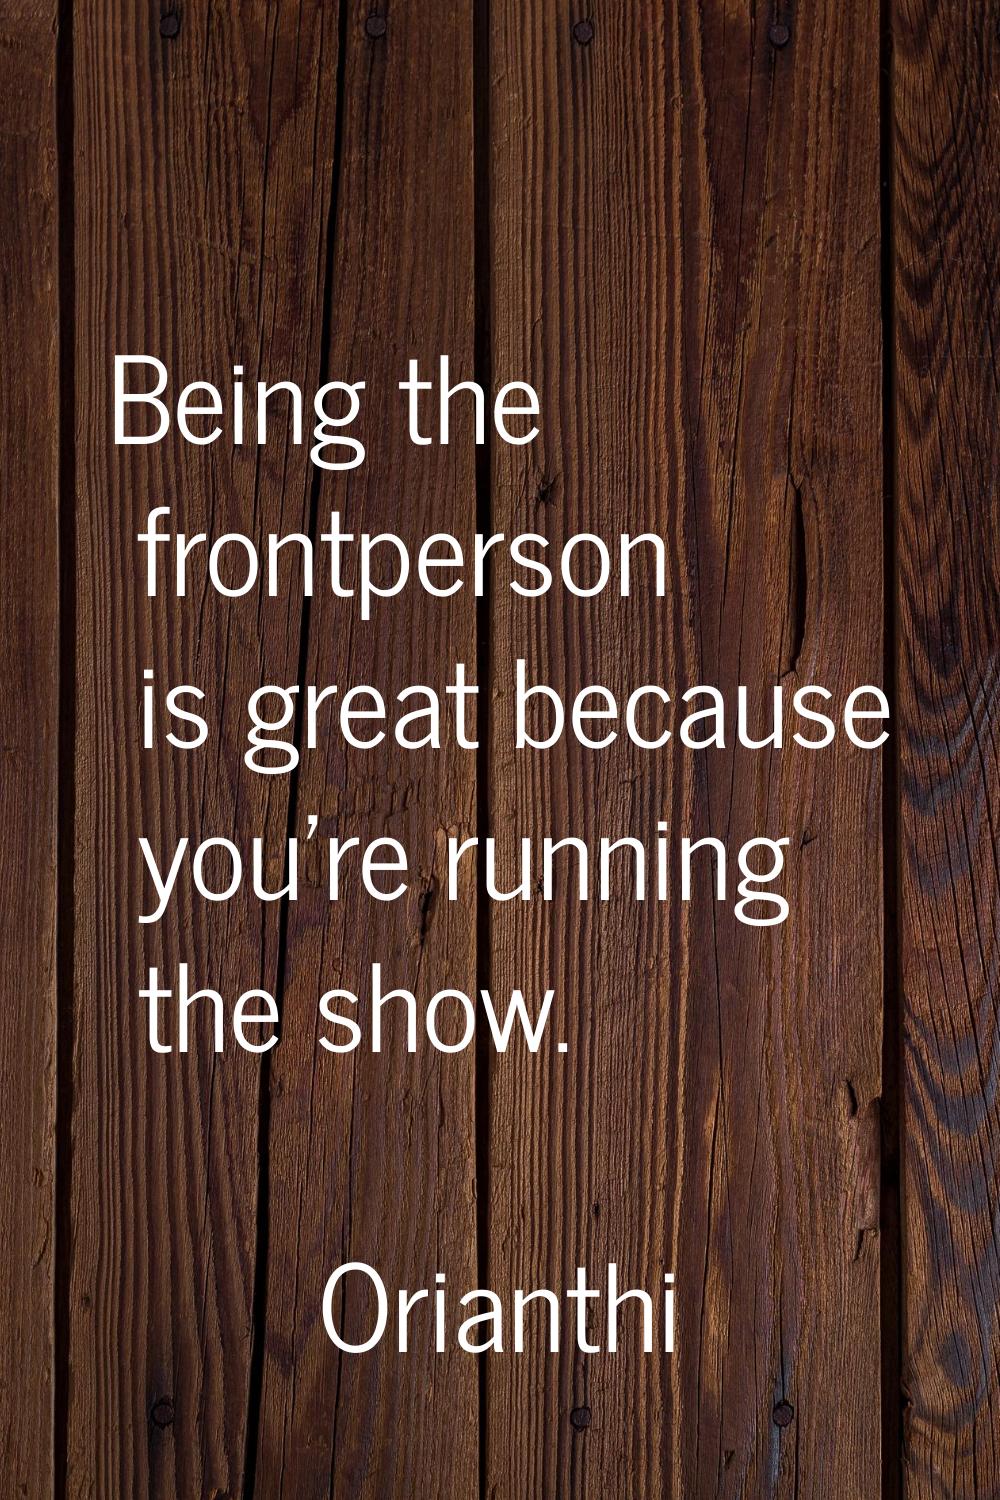 Being the frontperson is great because you're running the show.